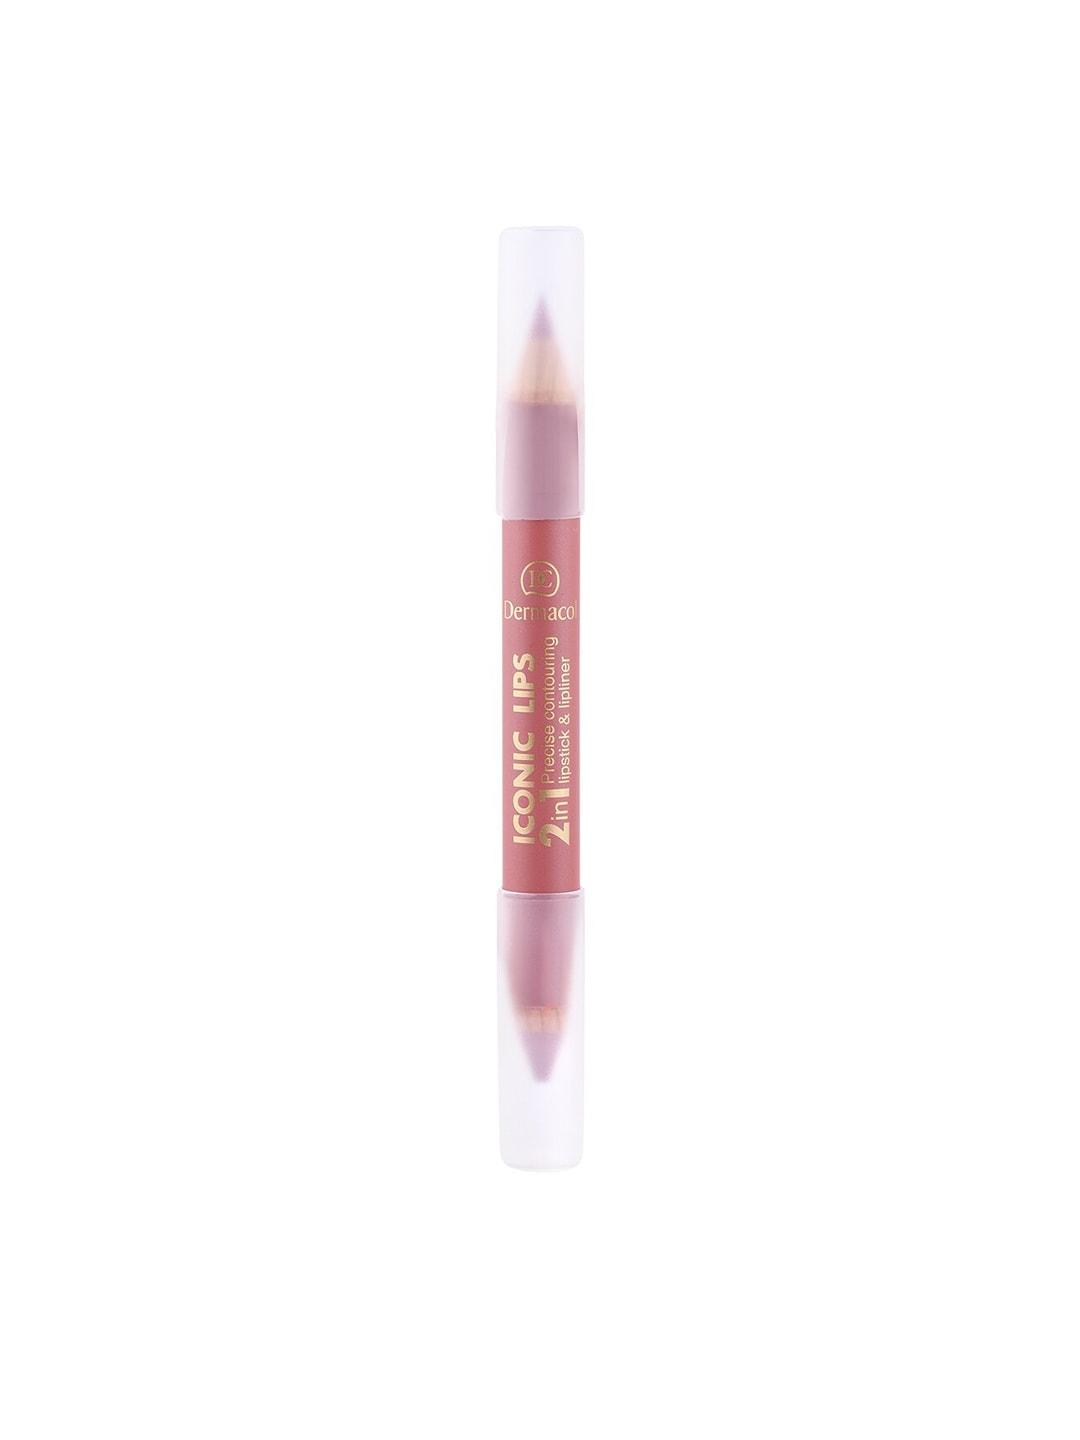 dermacol iconic lips 2 in 1 lip liner & lipstick  - 01